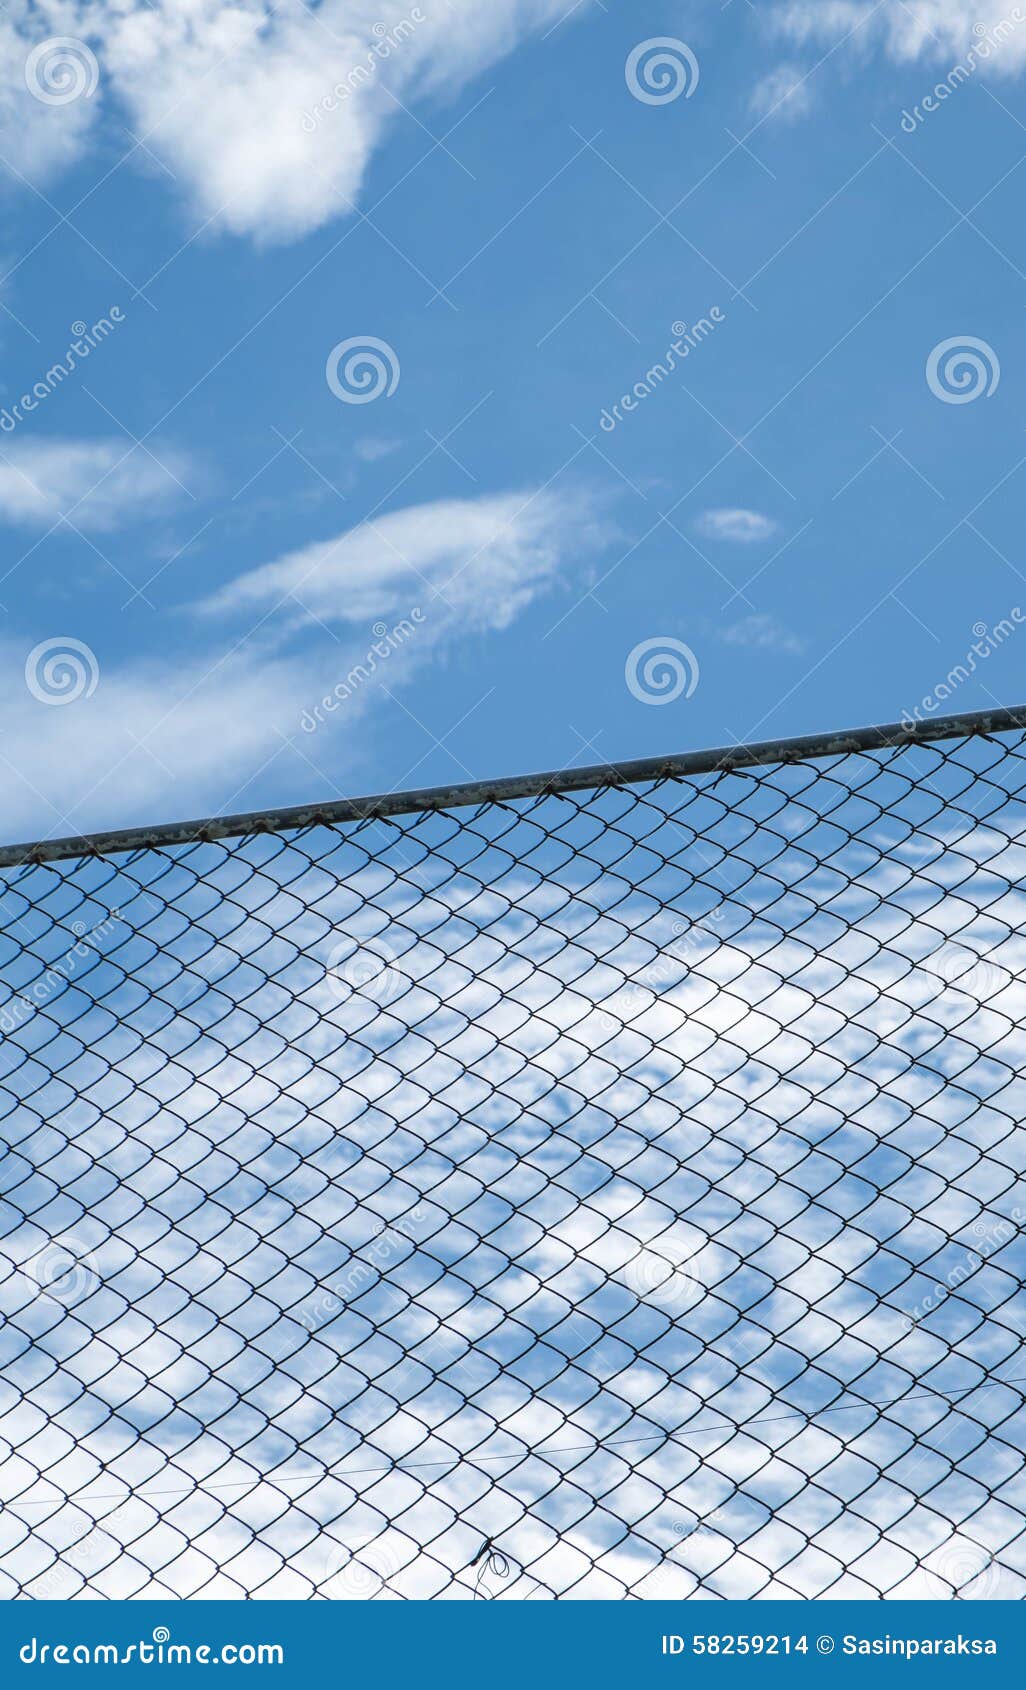 Steel Net Fence Against Blue Sky Stock Photo - Image of barrier ...
